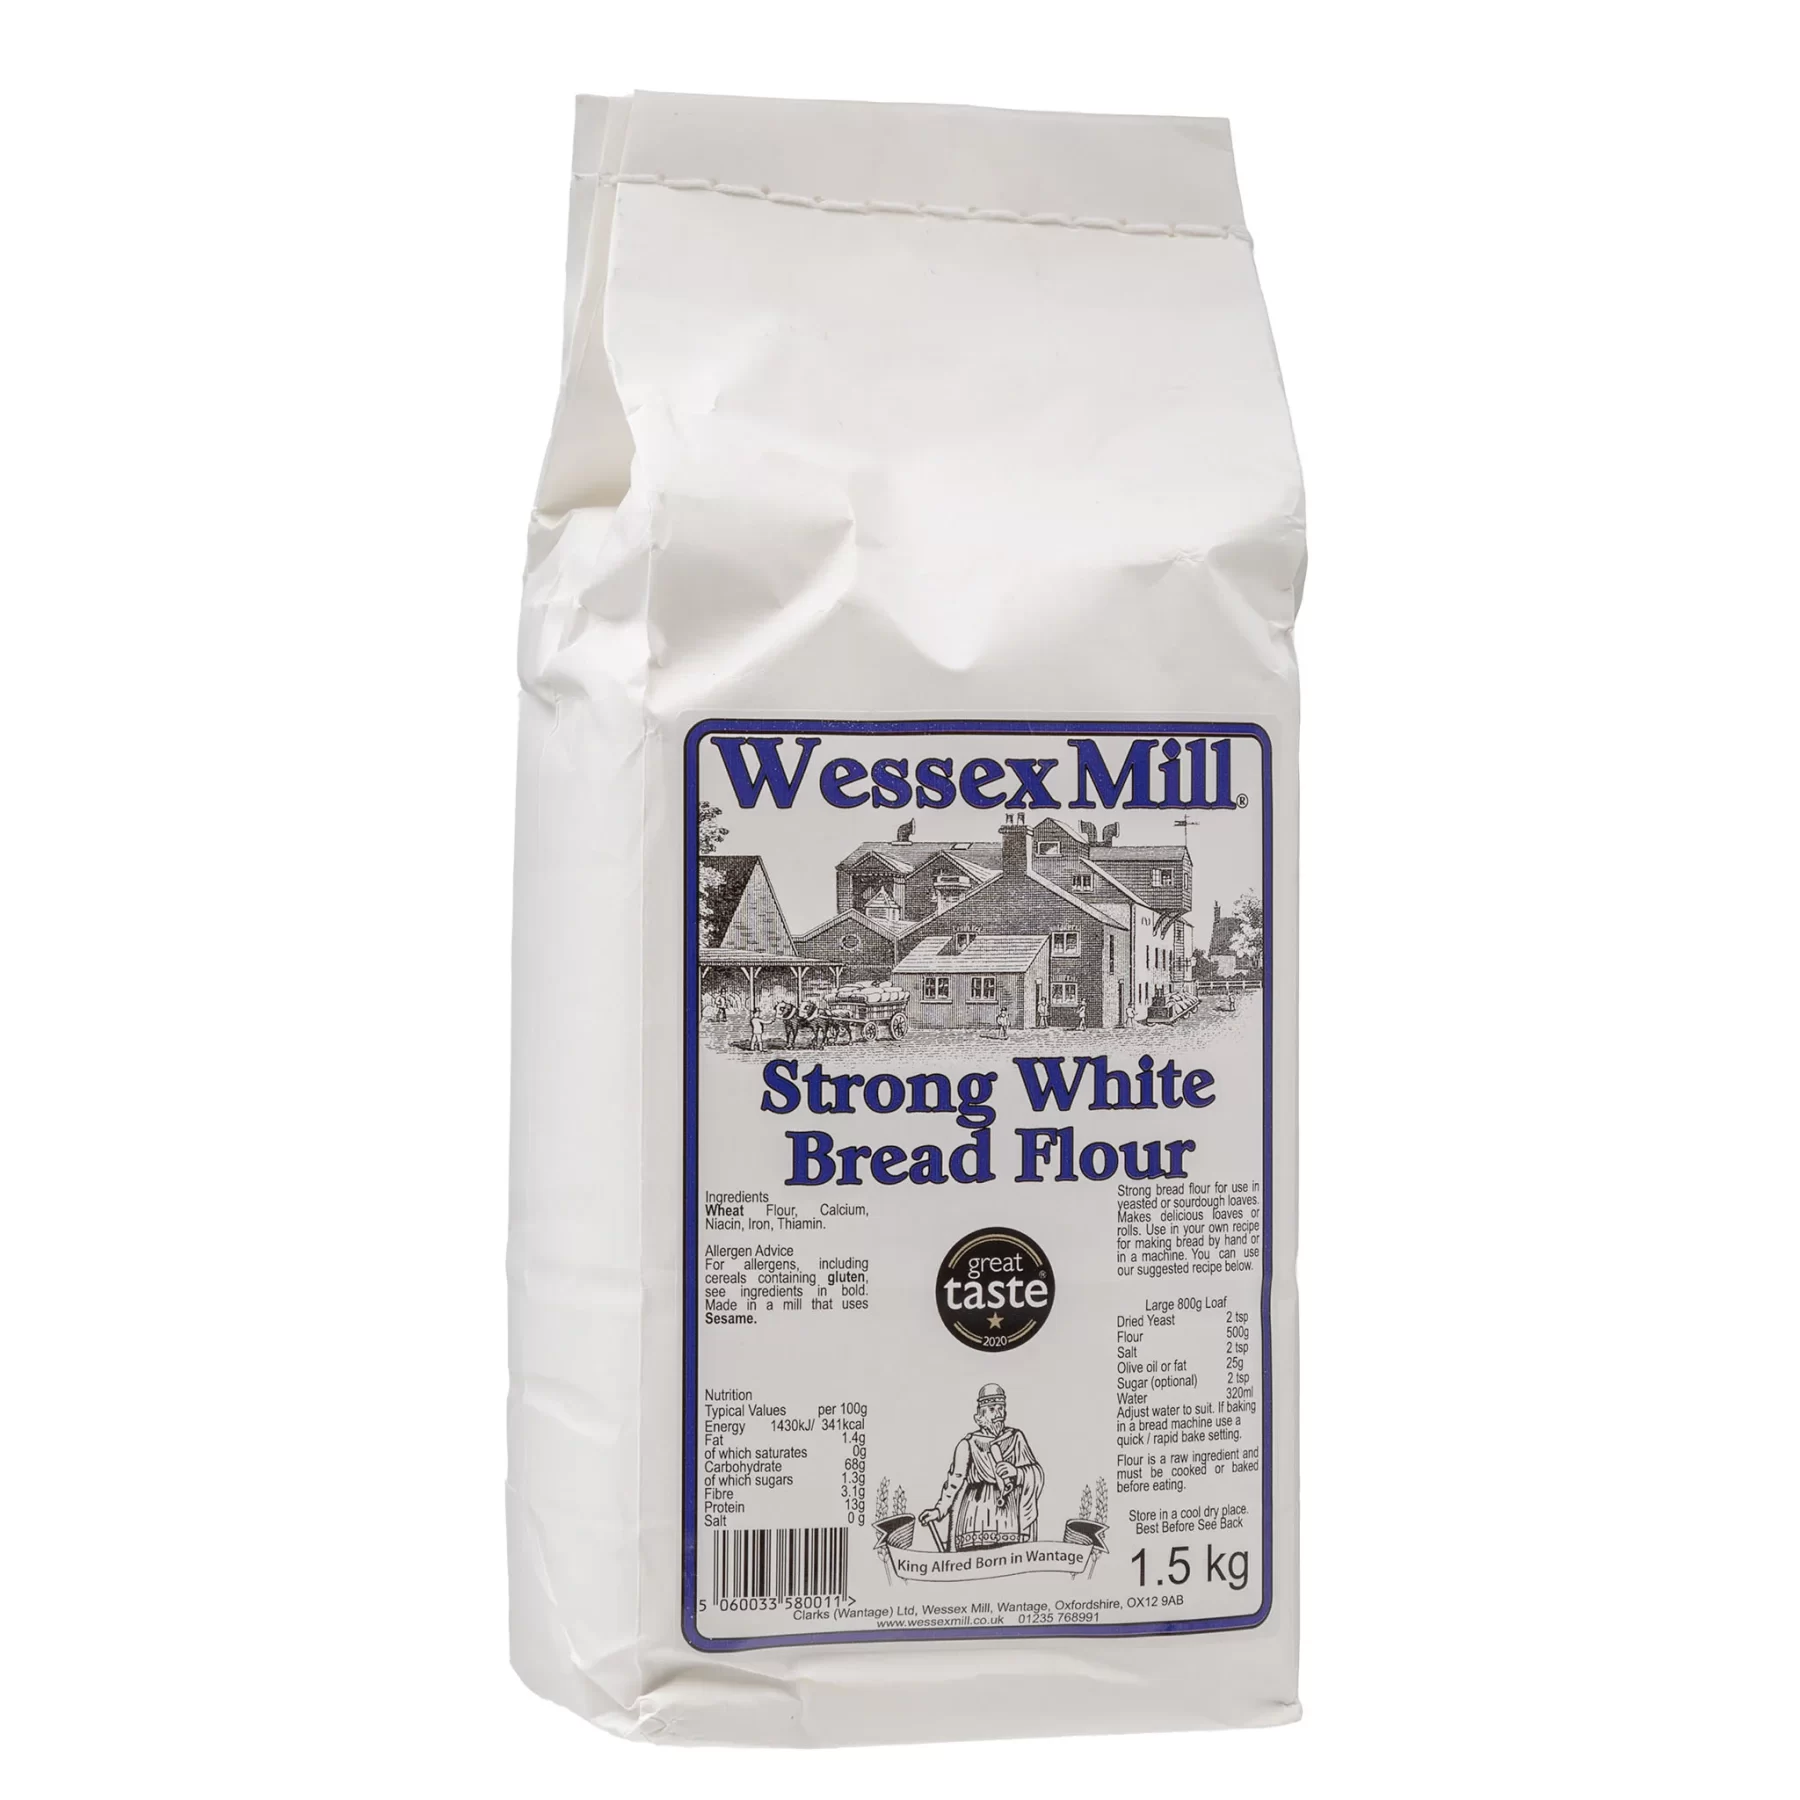 04140-wessex-mill-strong-white-bread-flour-1.5kg-20220811-3300